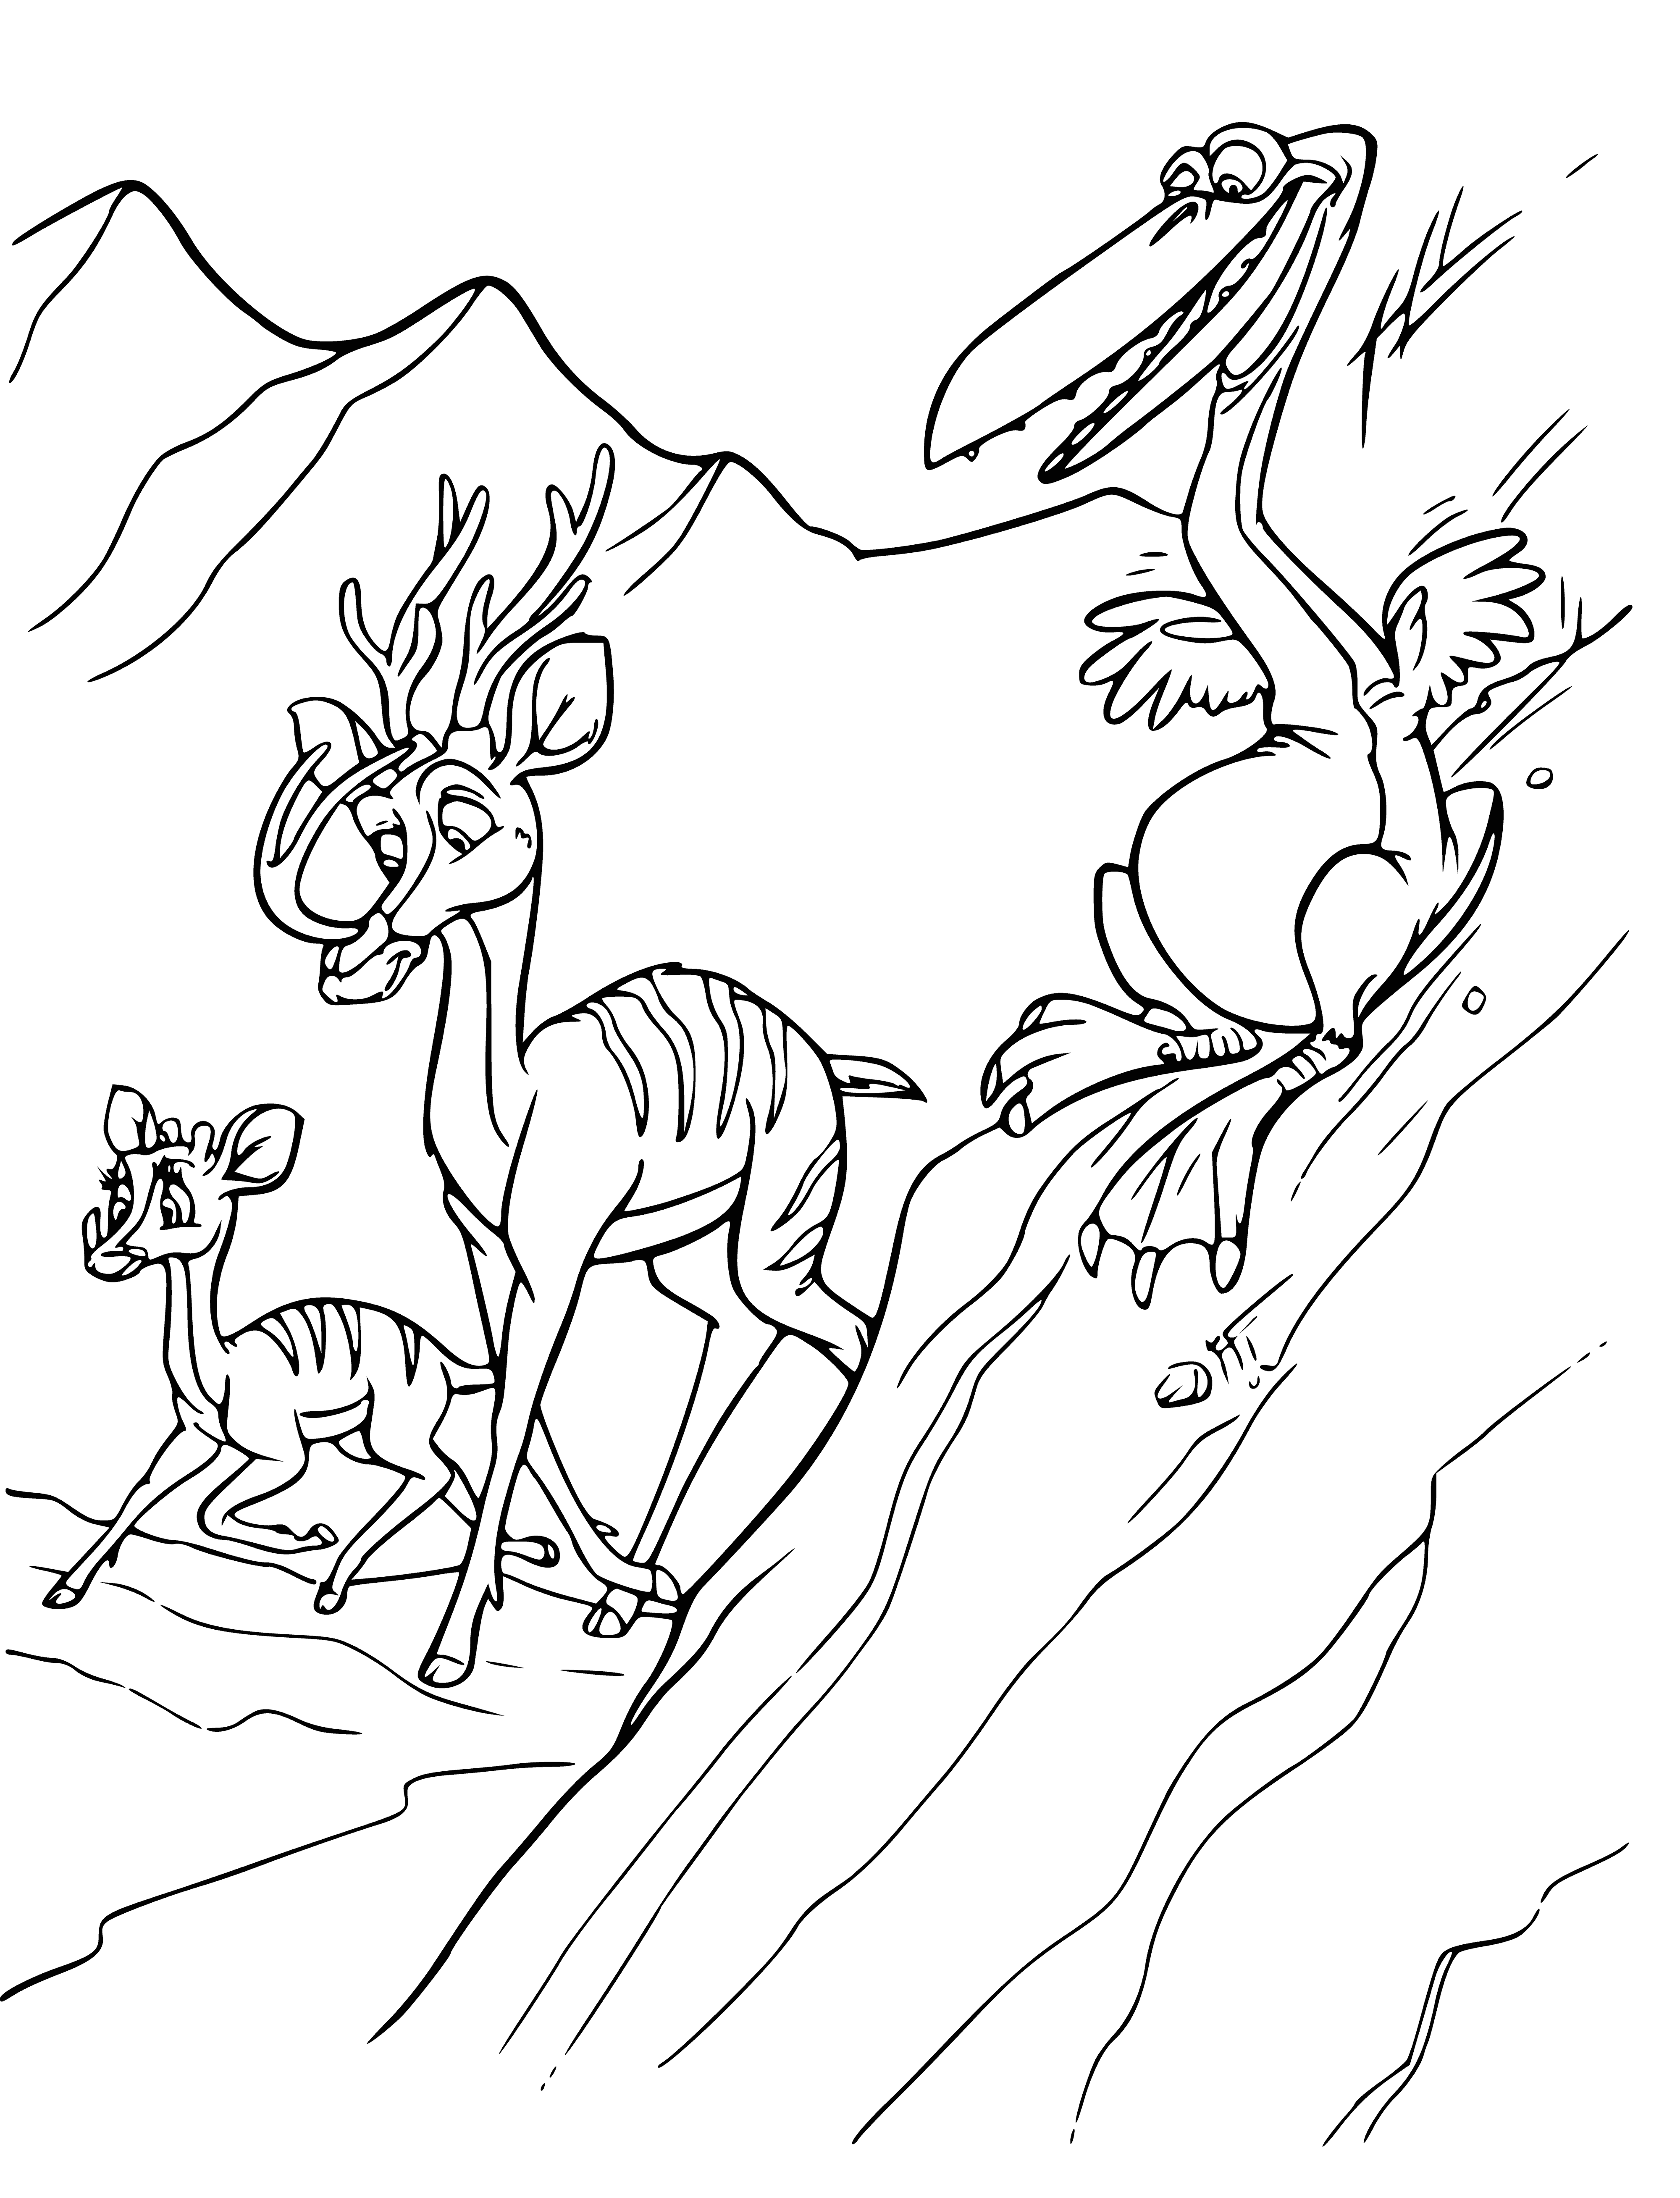 coloring page: Beasts running to ship sailing away from snowy land.